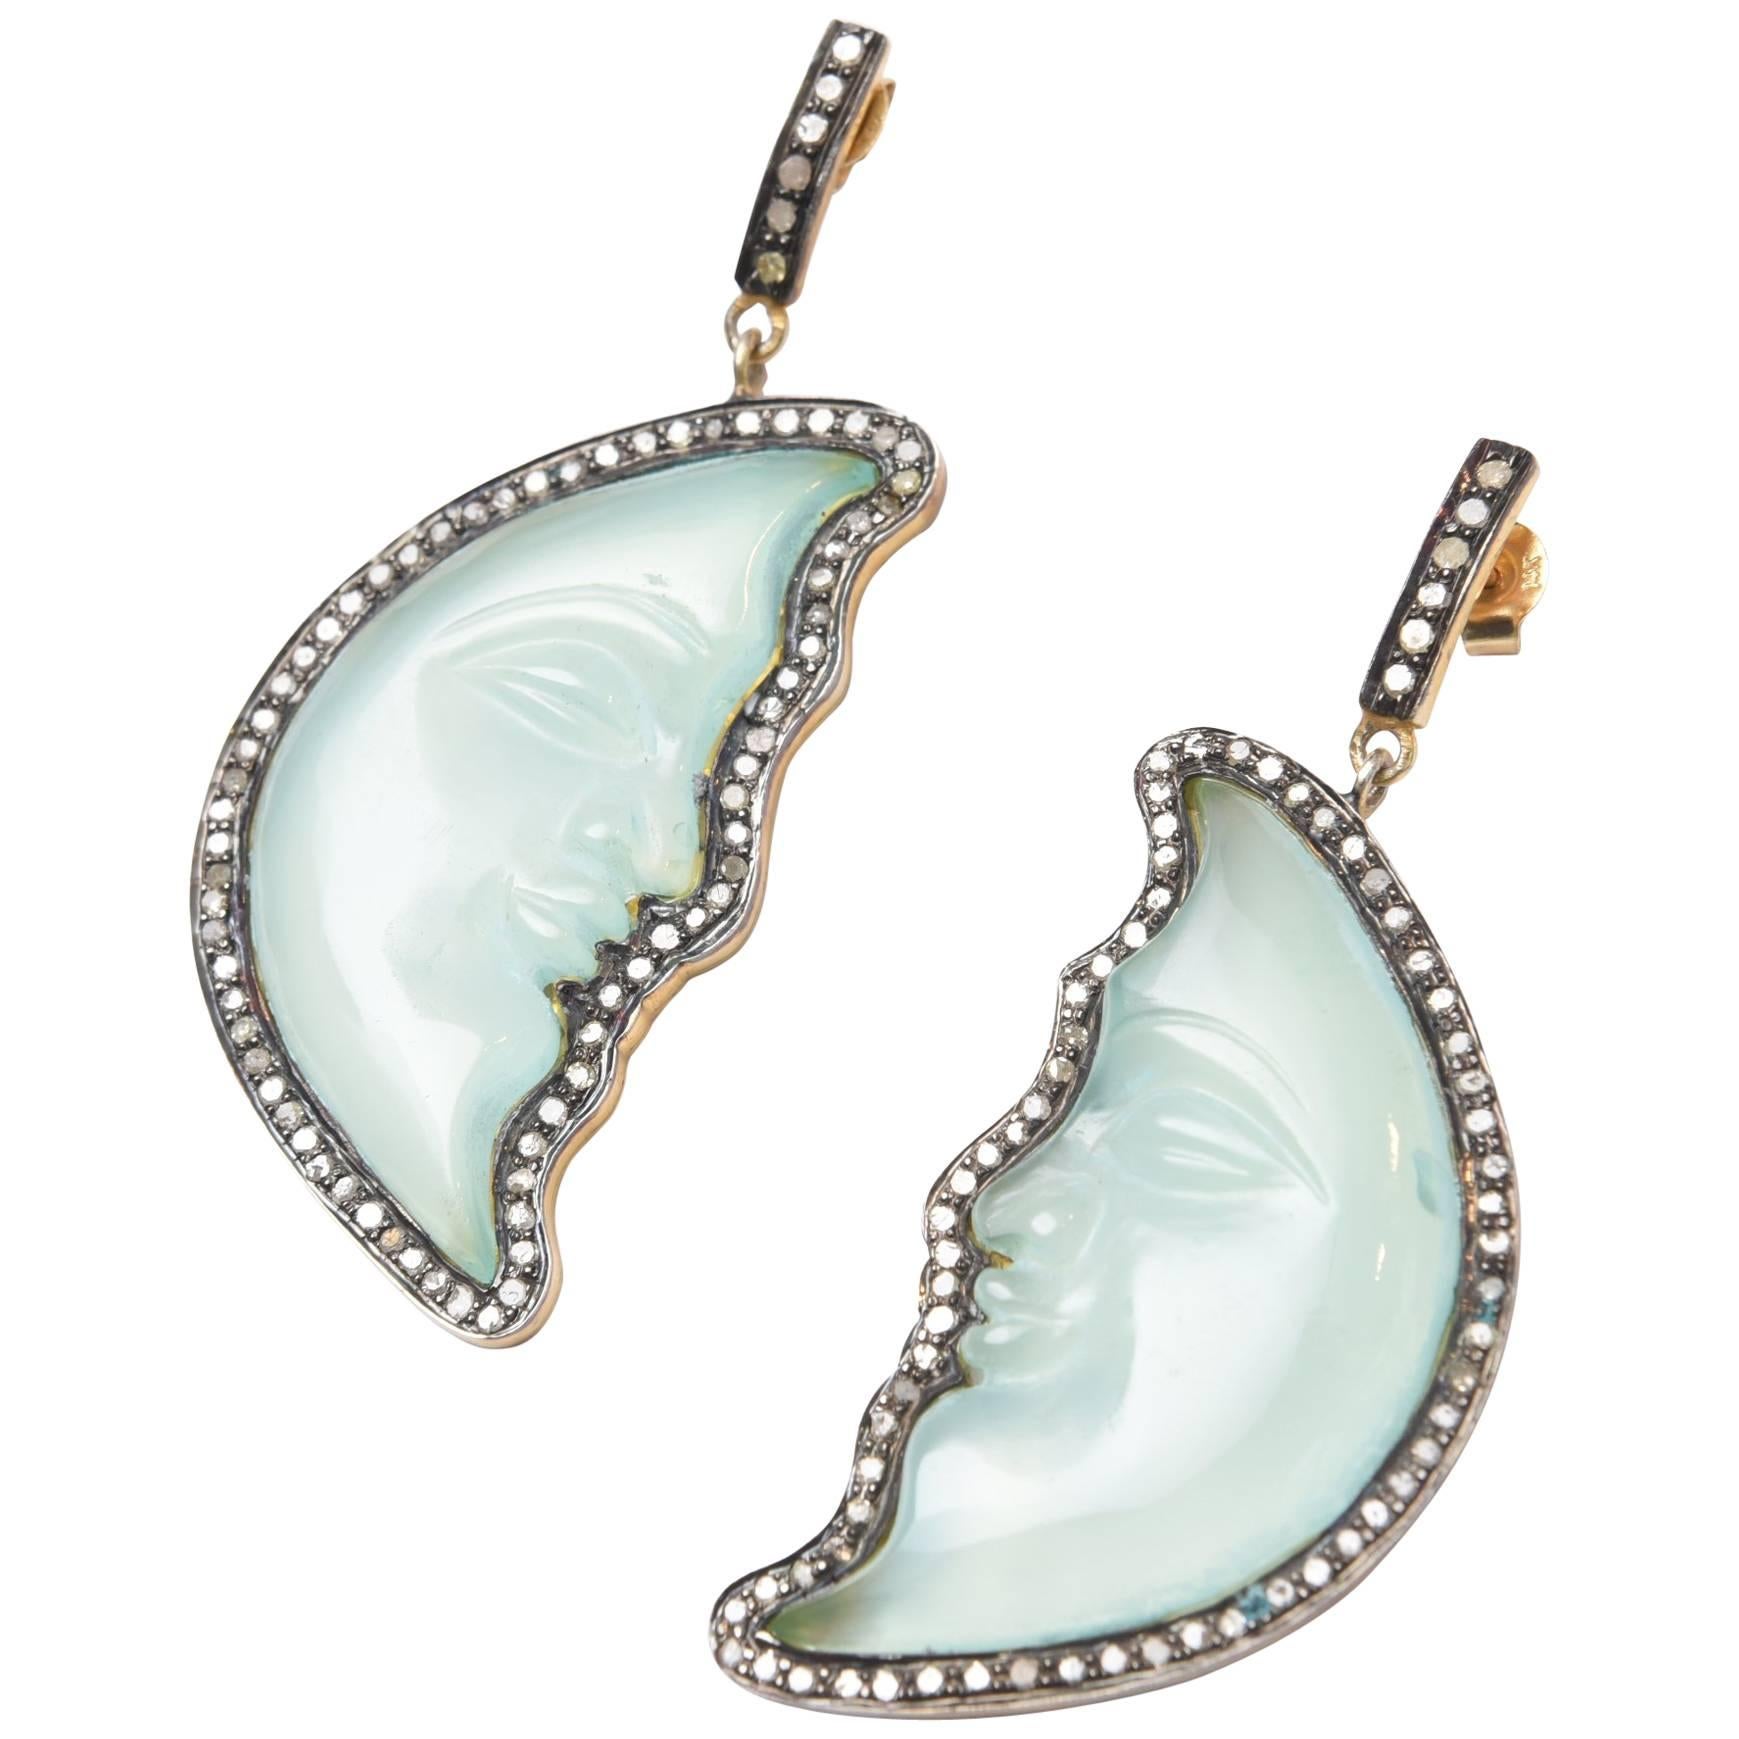 Man in the Moon Carved Chalcedony and Diamond Earrings